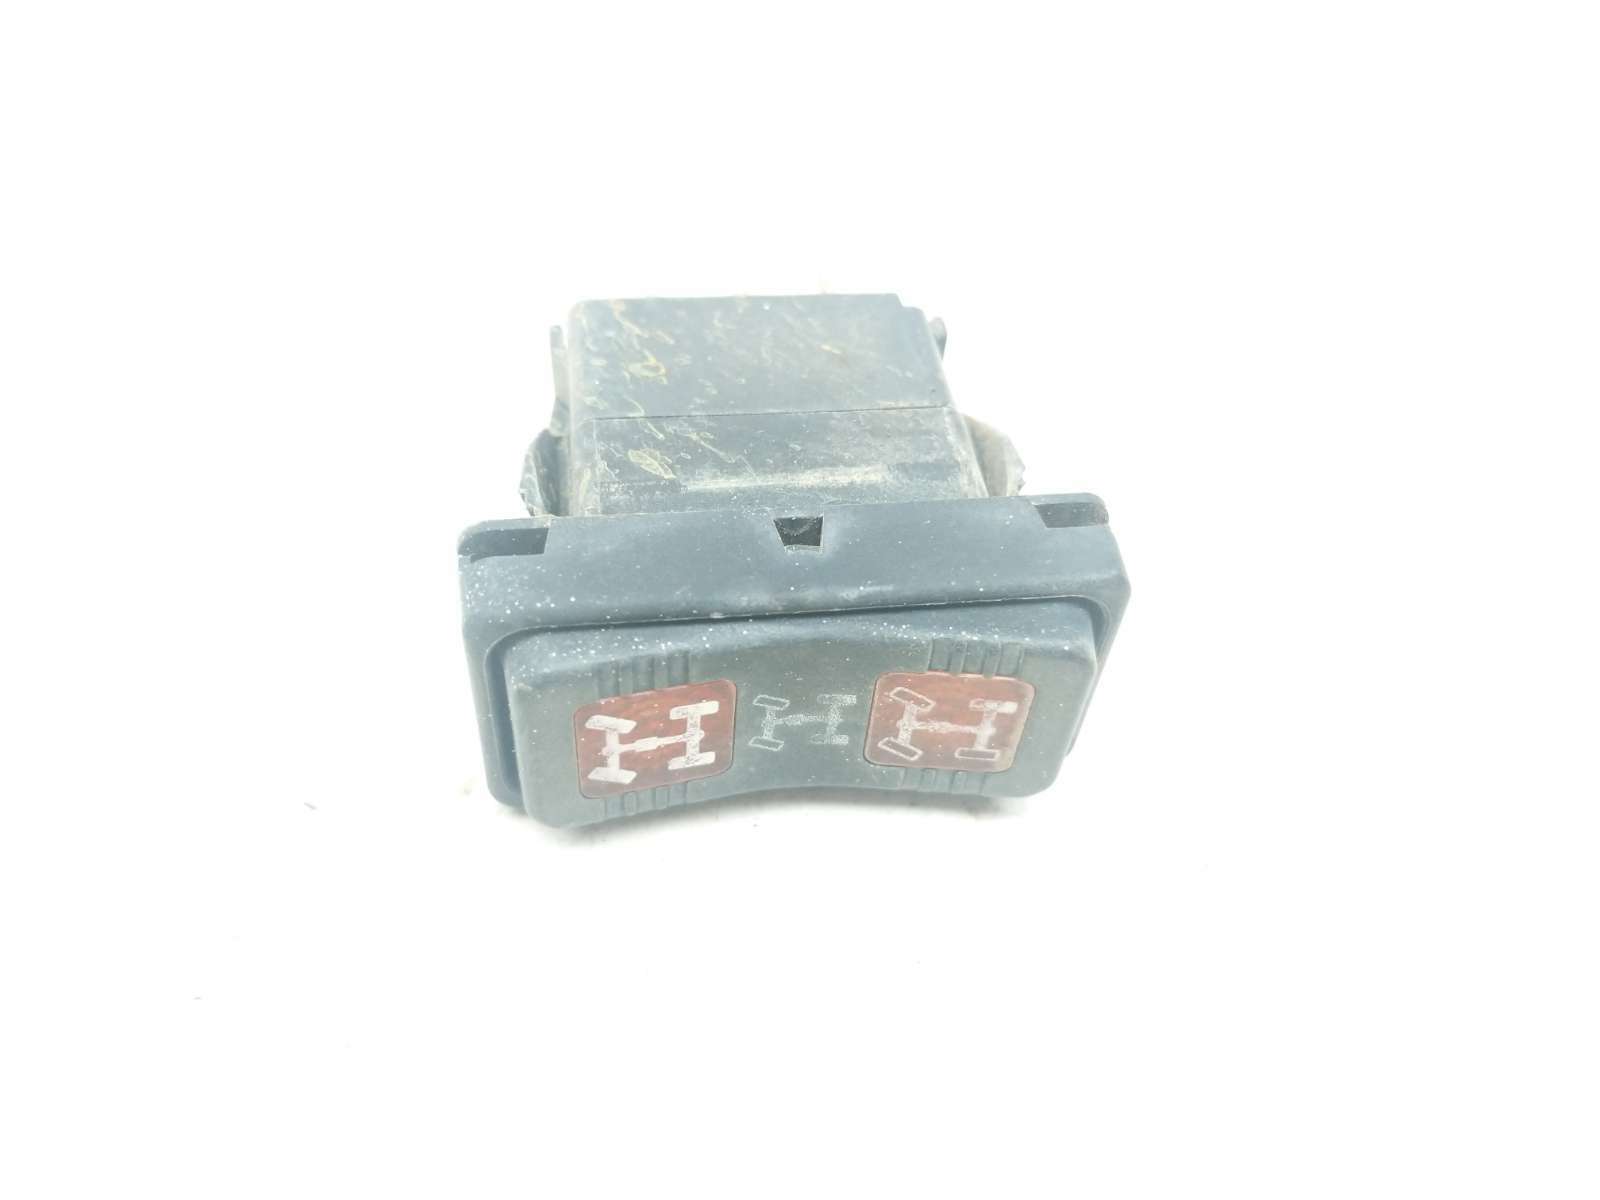 12 Bob Cat 3400 (Ranger Diesel) 4WD 2WD AWD Control Button Switch